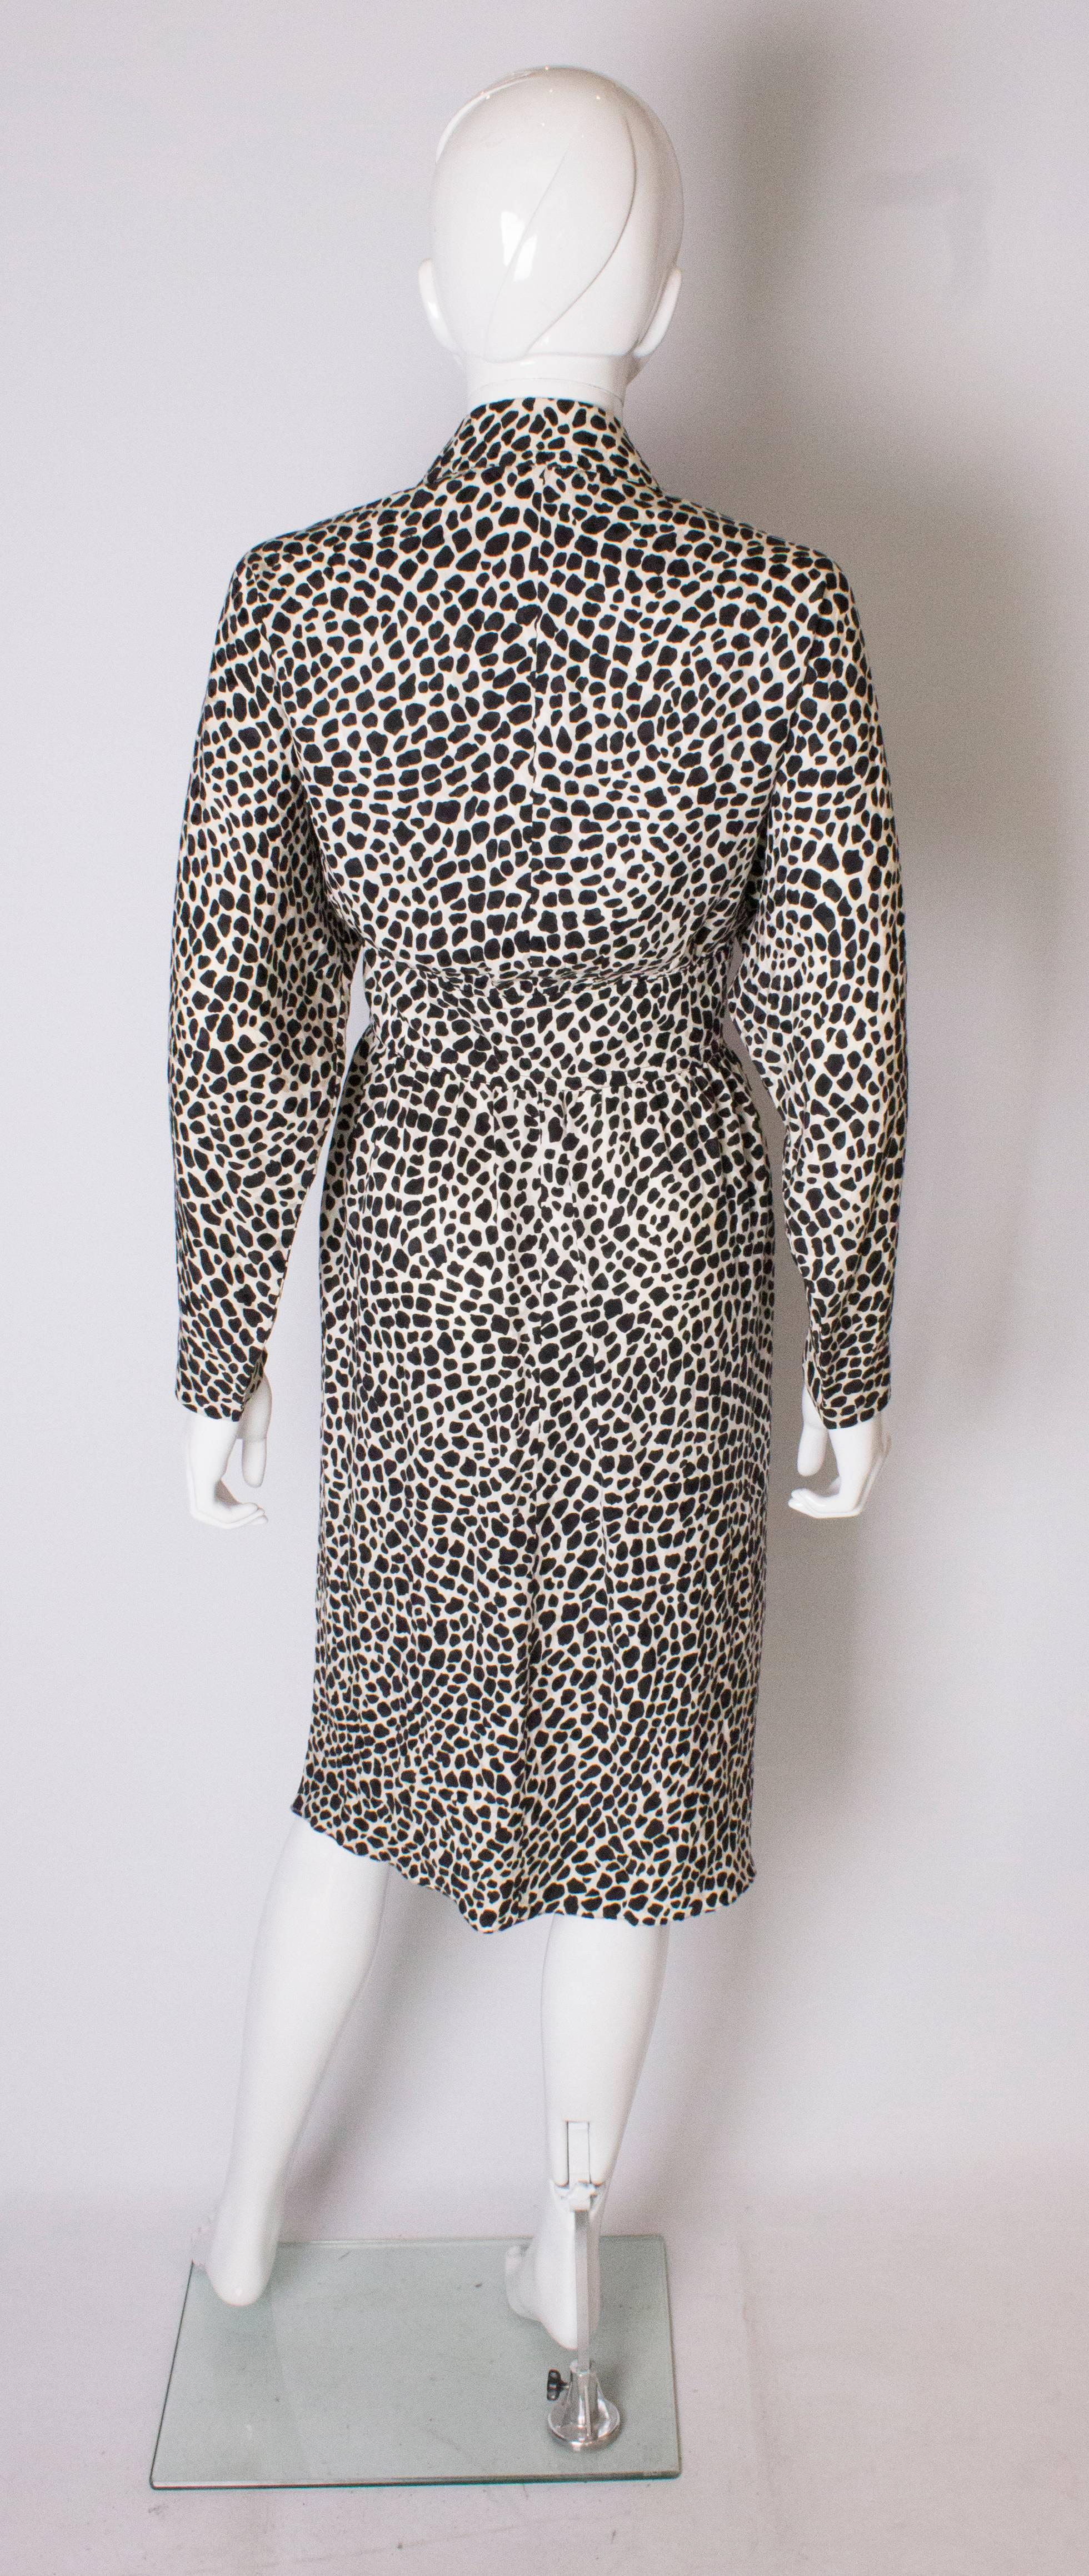 A Vintage 1980s Black and White printed Dress with bow detail by Adele Simpson 3